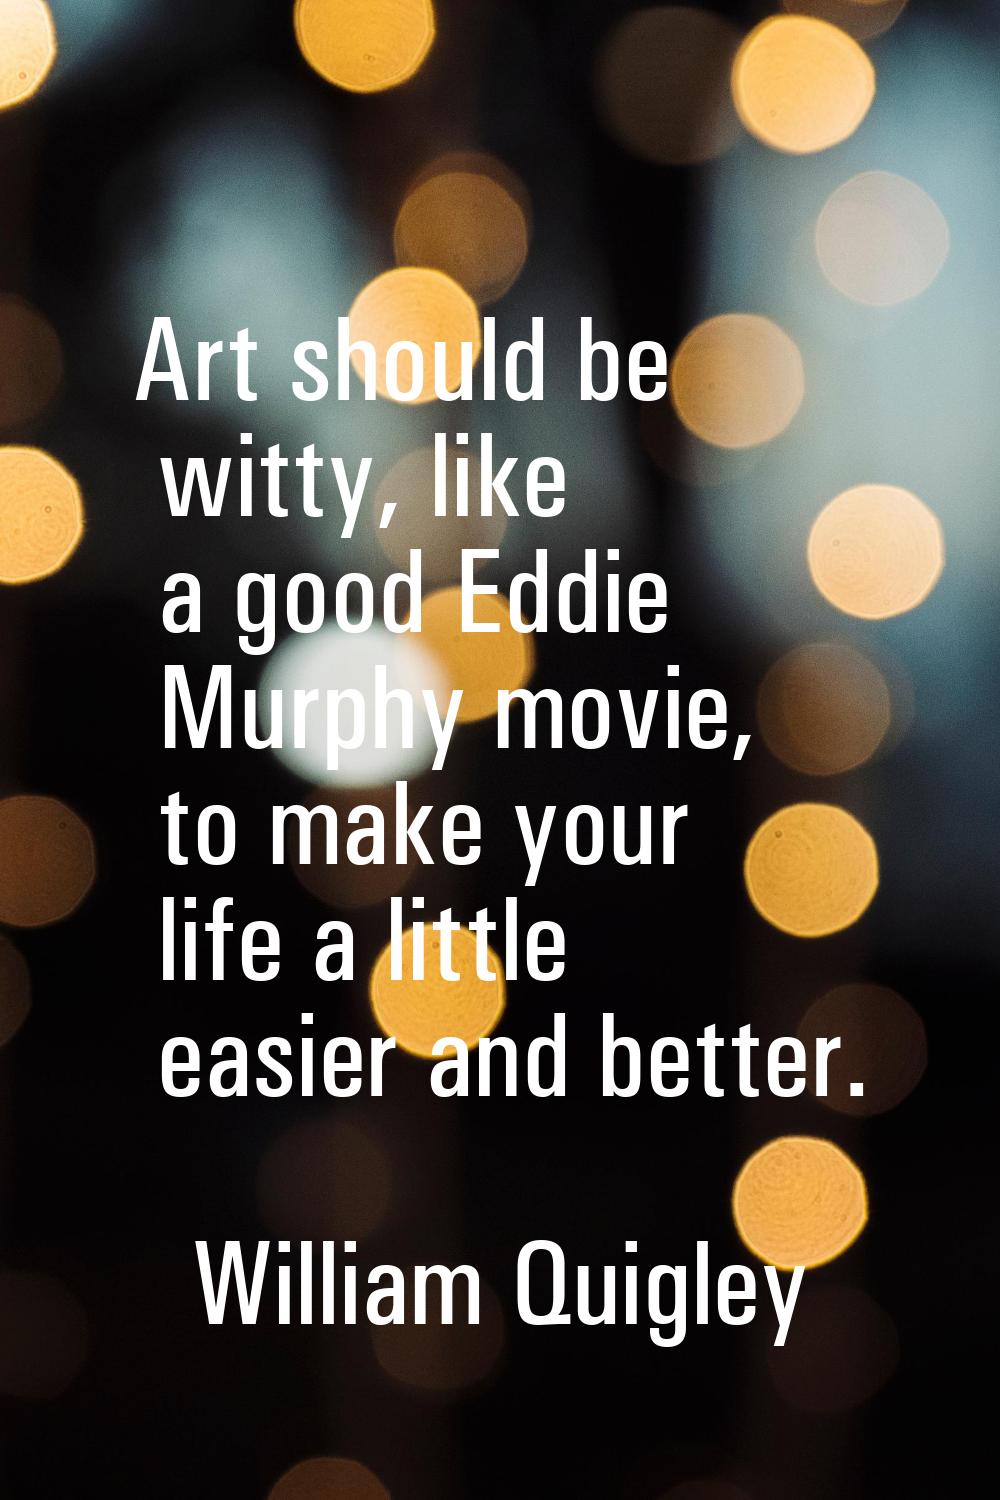 Art should be witty, like a good Eddie Murphy movie, to make your life a little easier and better.